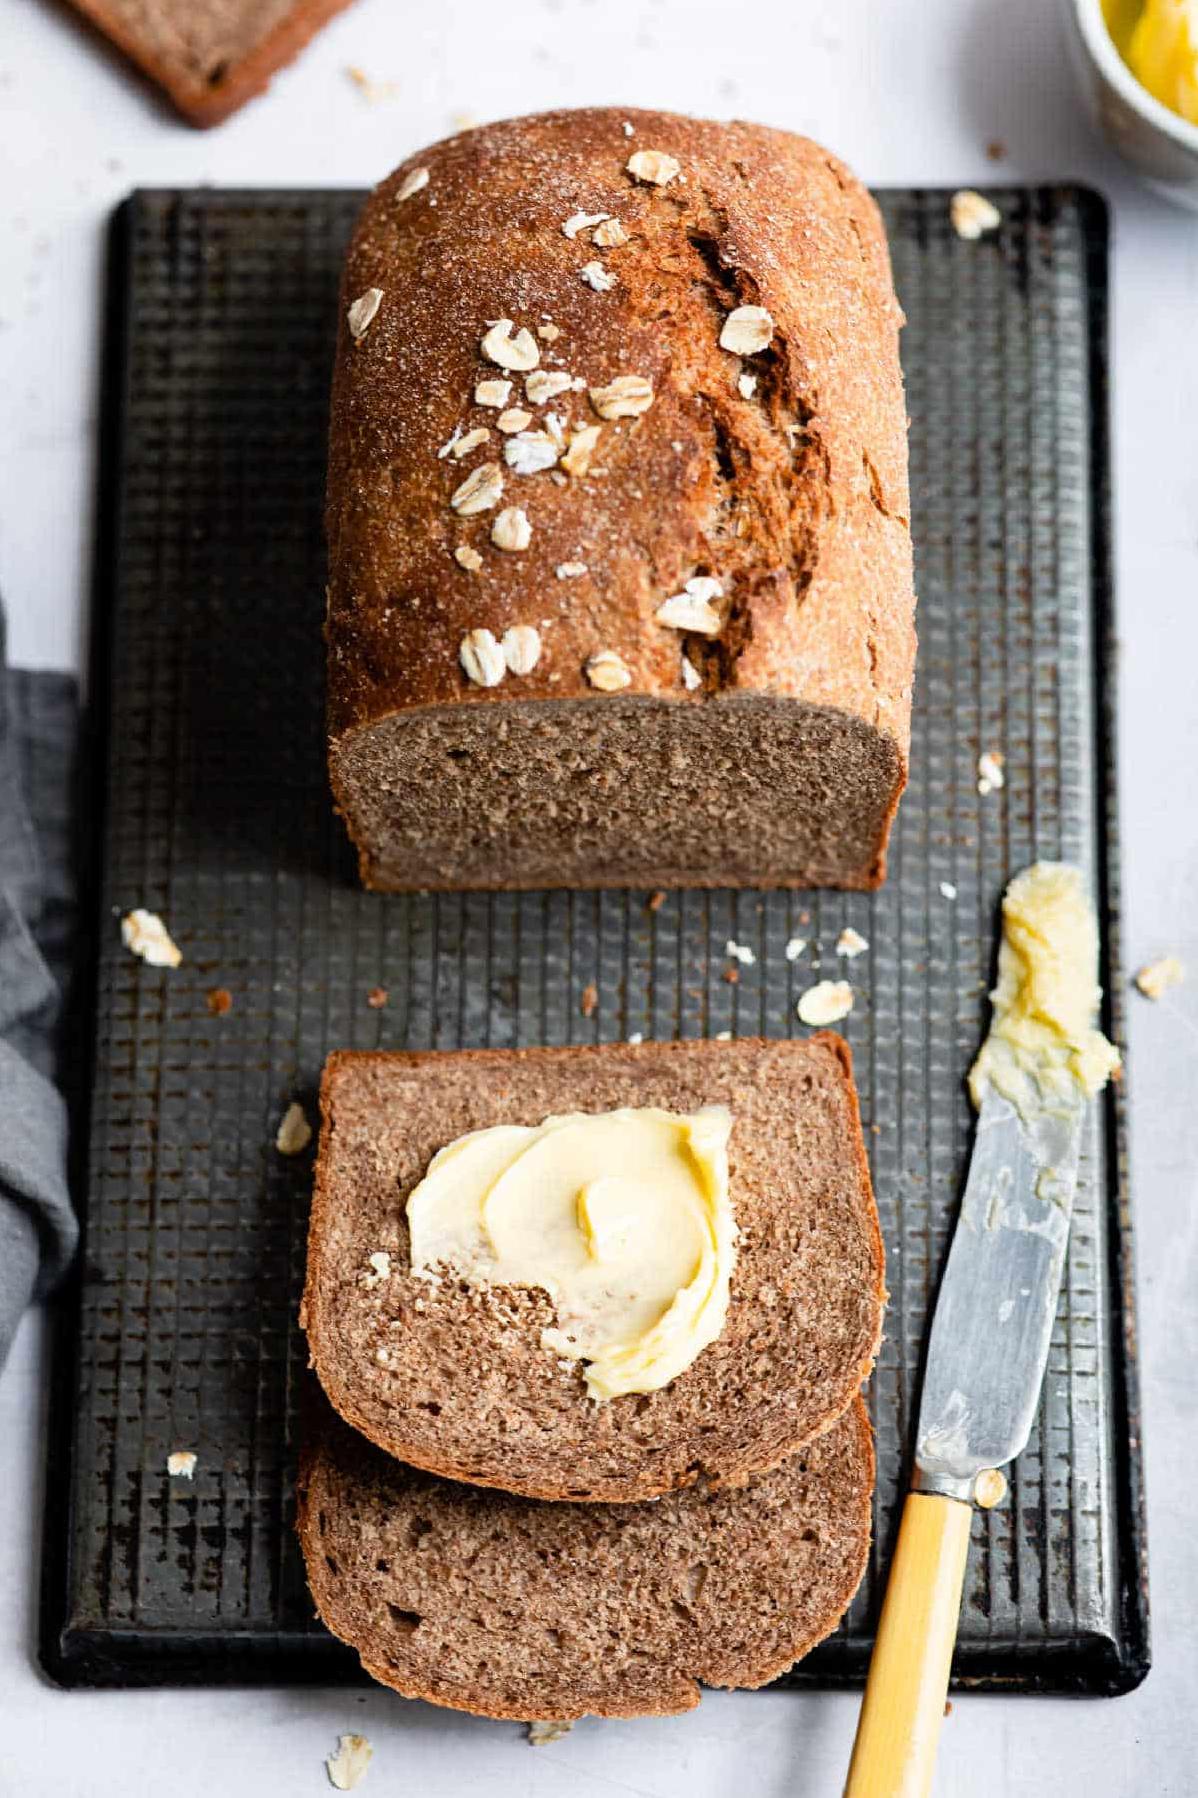  Say goodbye to boring gluten-free bread and hello to this Outback Steakhouse copycat recipe